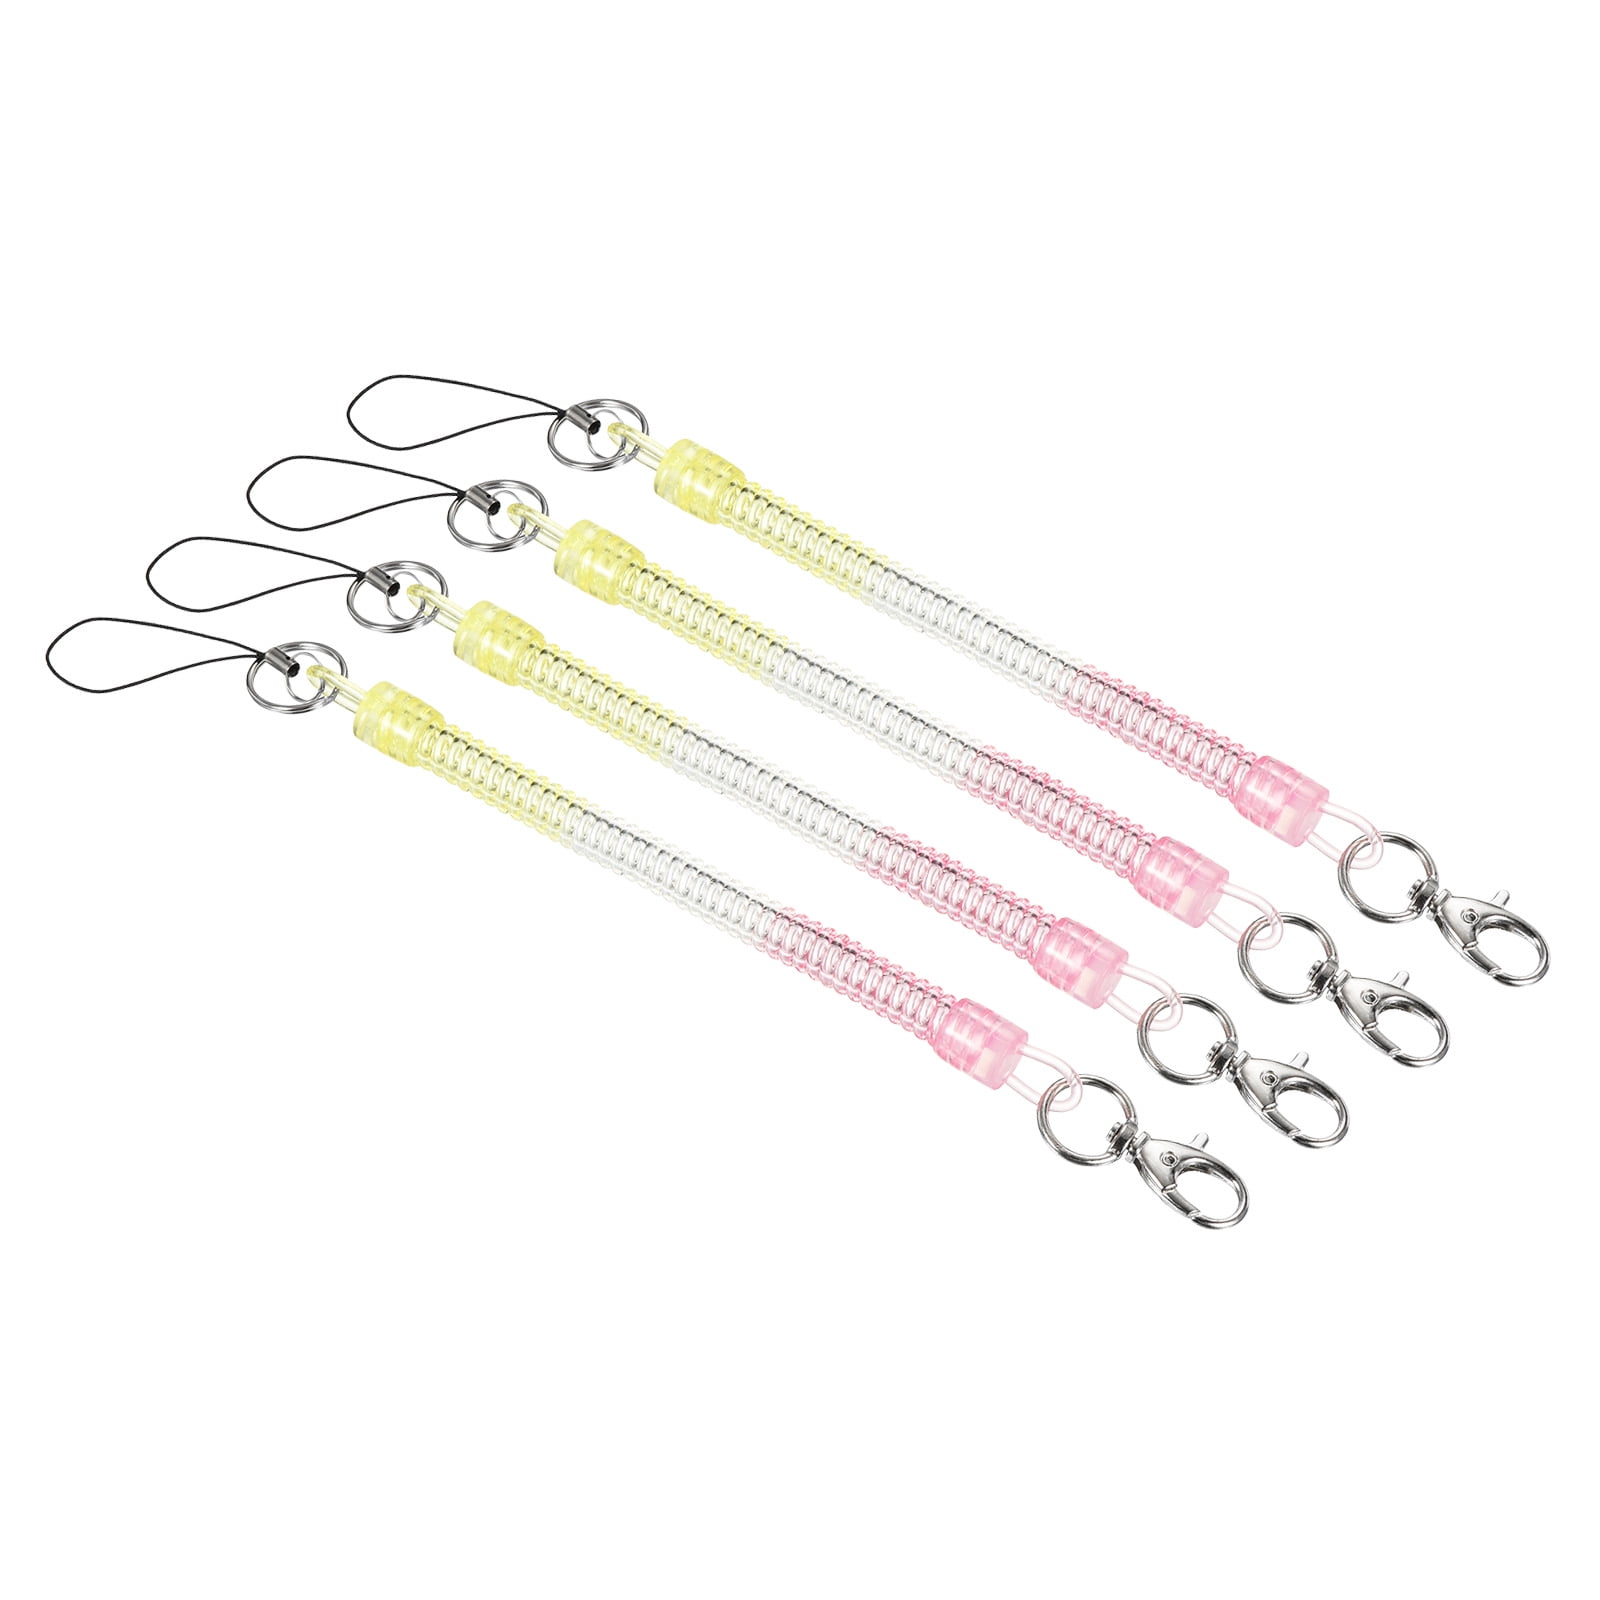 Uxcell Retractable Coil Spring Keychain Clasp with Key Ring 220mm, 4 Pack Plastic Spiral Stretchy Cord, Yellow Pink, Women's, Size: 220 mm